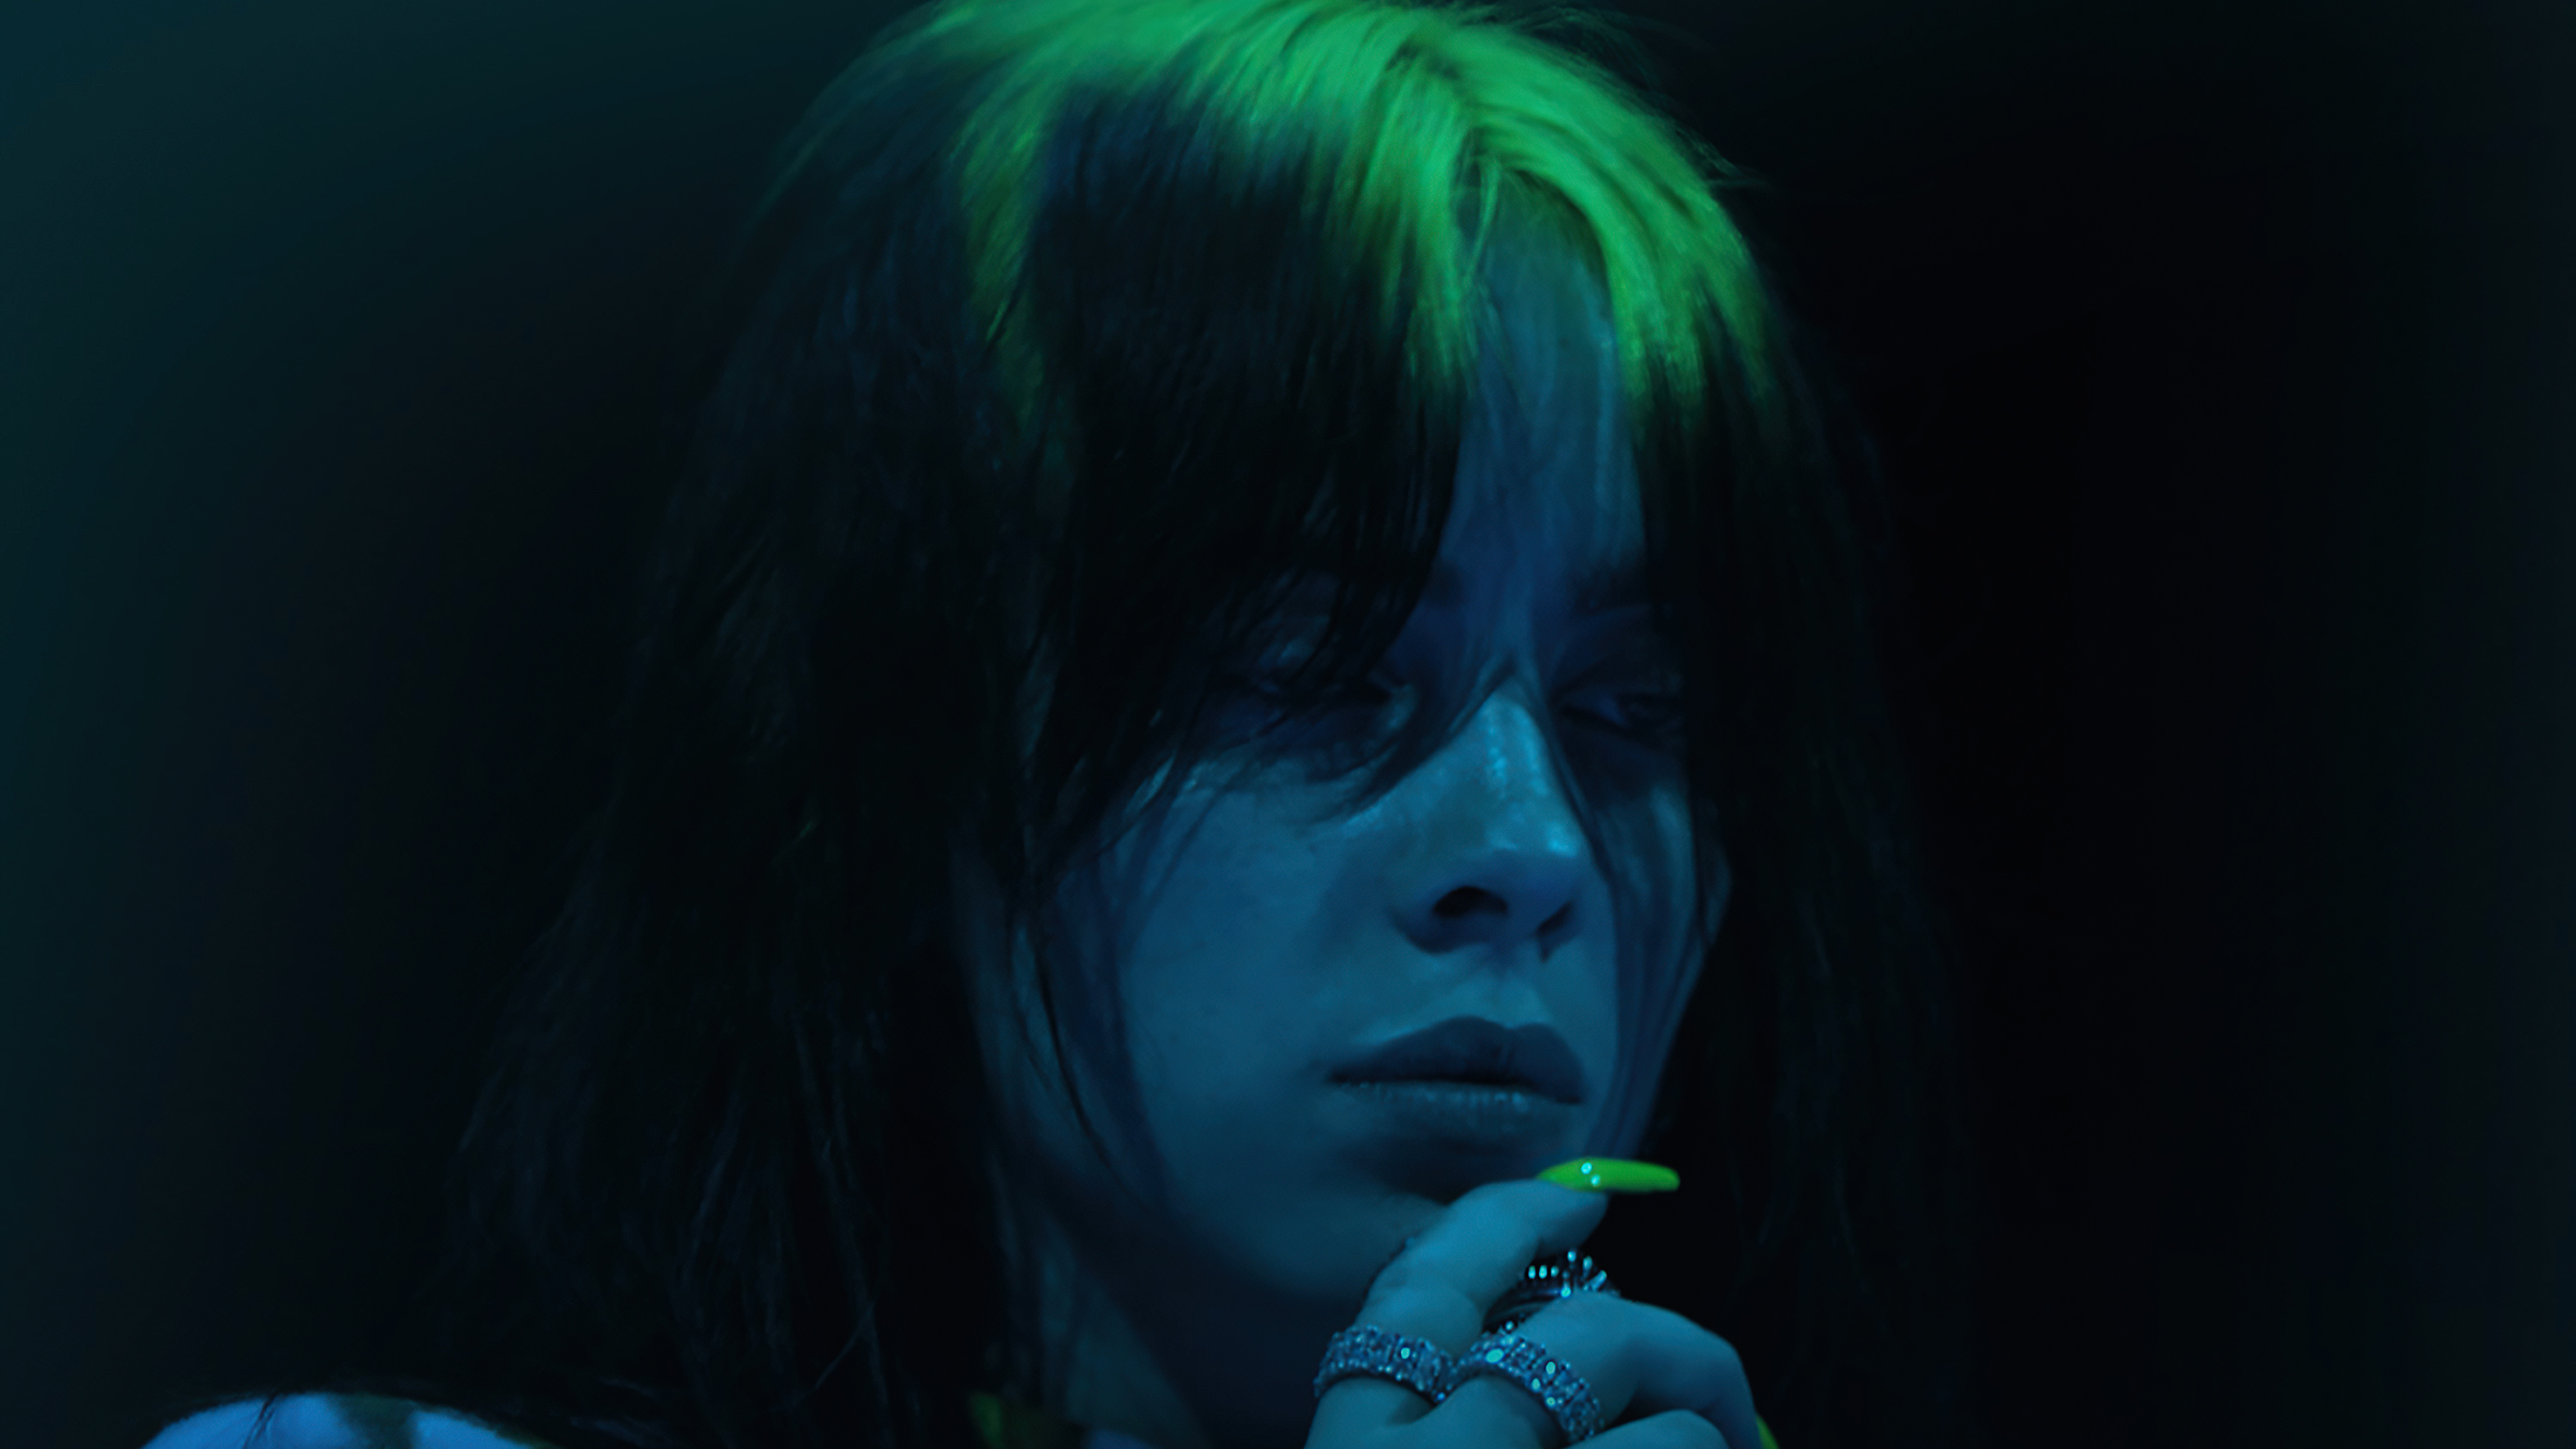 Billie Eilish The Worlds A Little Blurry 4k Hd Music 4k Wallpapers Images Backgrounds Photos And Pictures